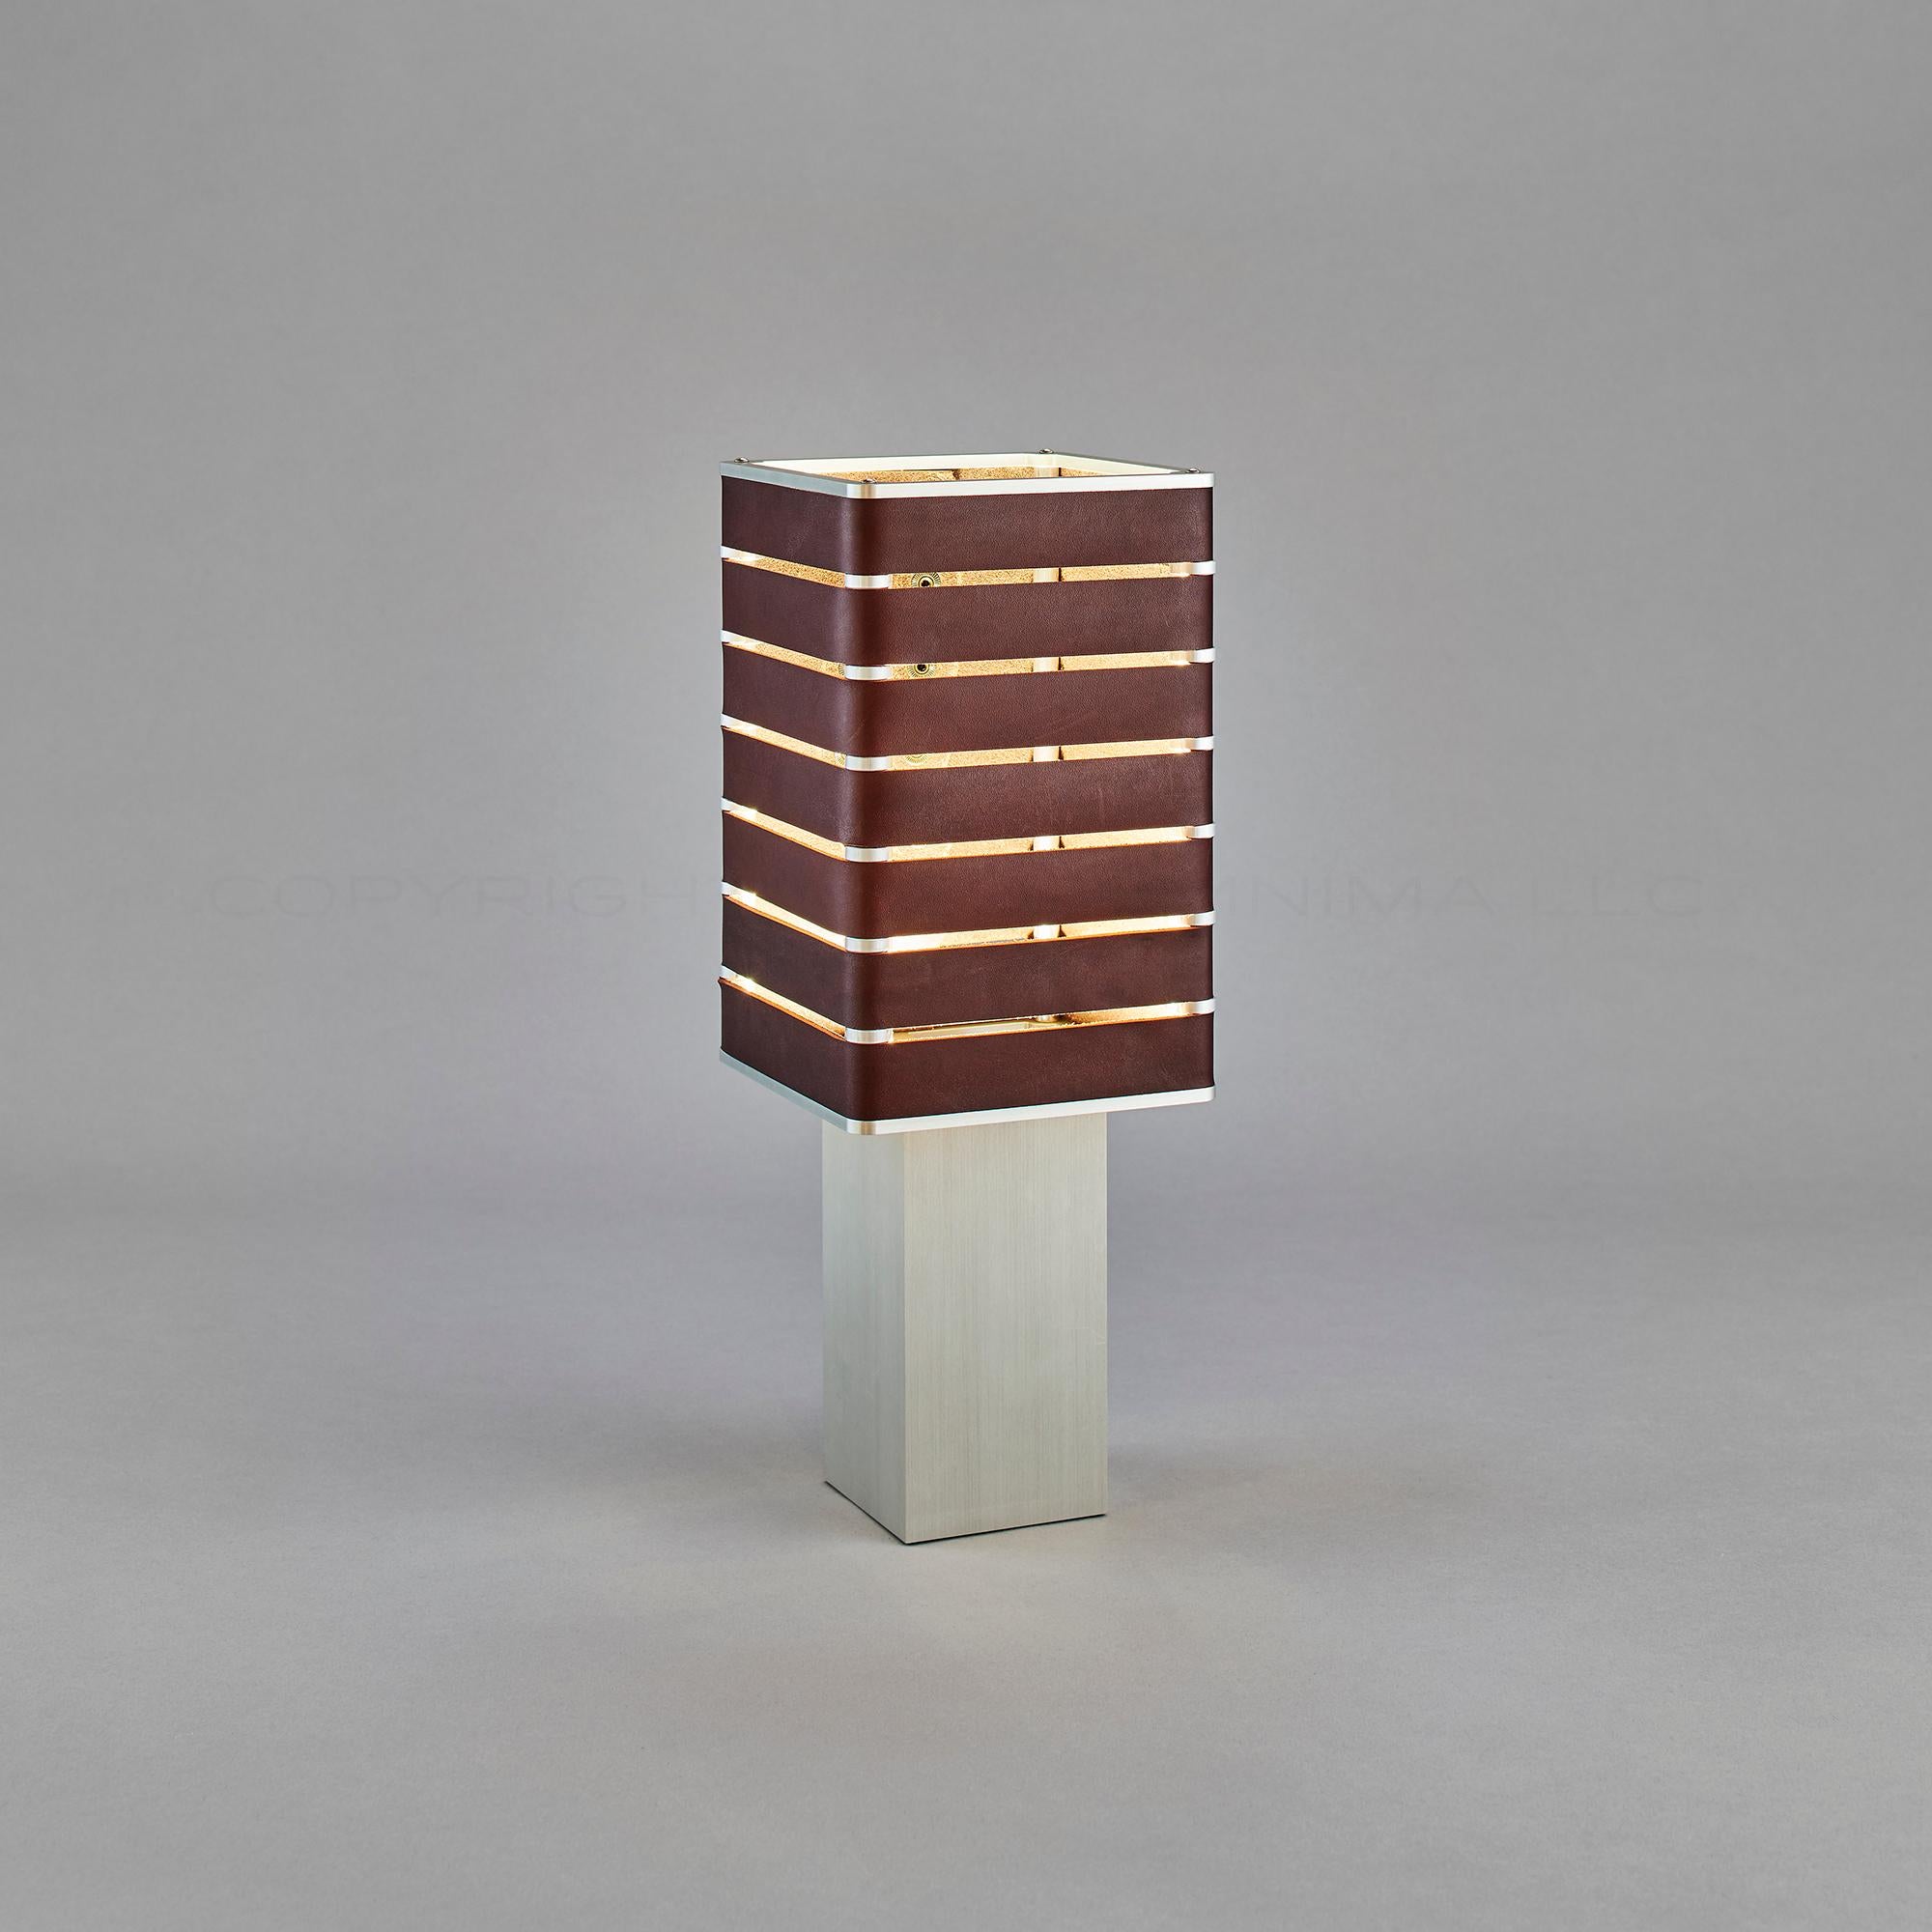 Anodized Modern, Minimal, Solid Metal Table Light in Bruciato Brown Italian Leather